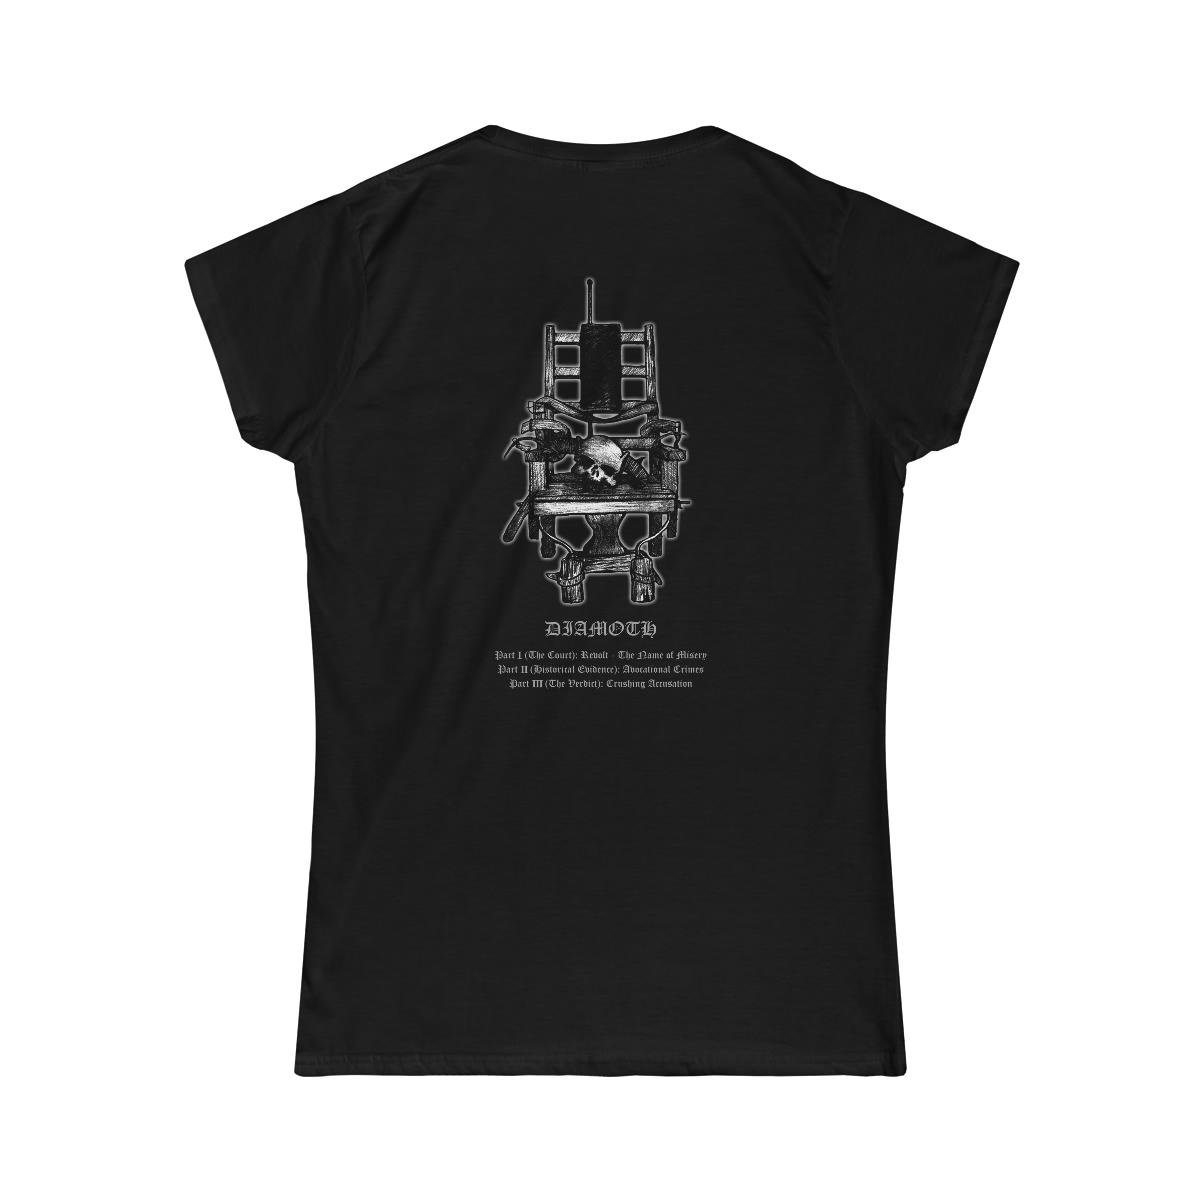 Diamoth – Crushed in Accusations Women’s Tshirt (2 Sided)